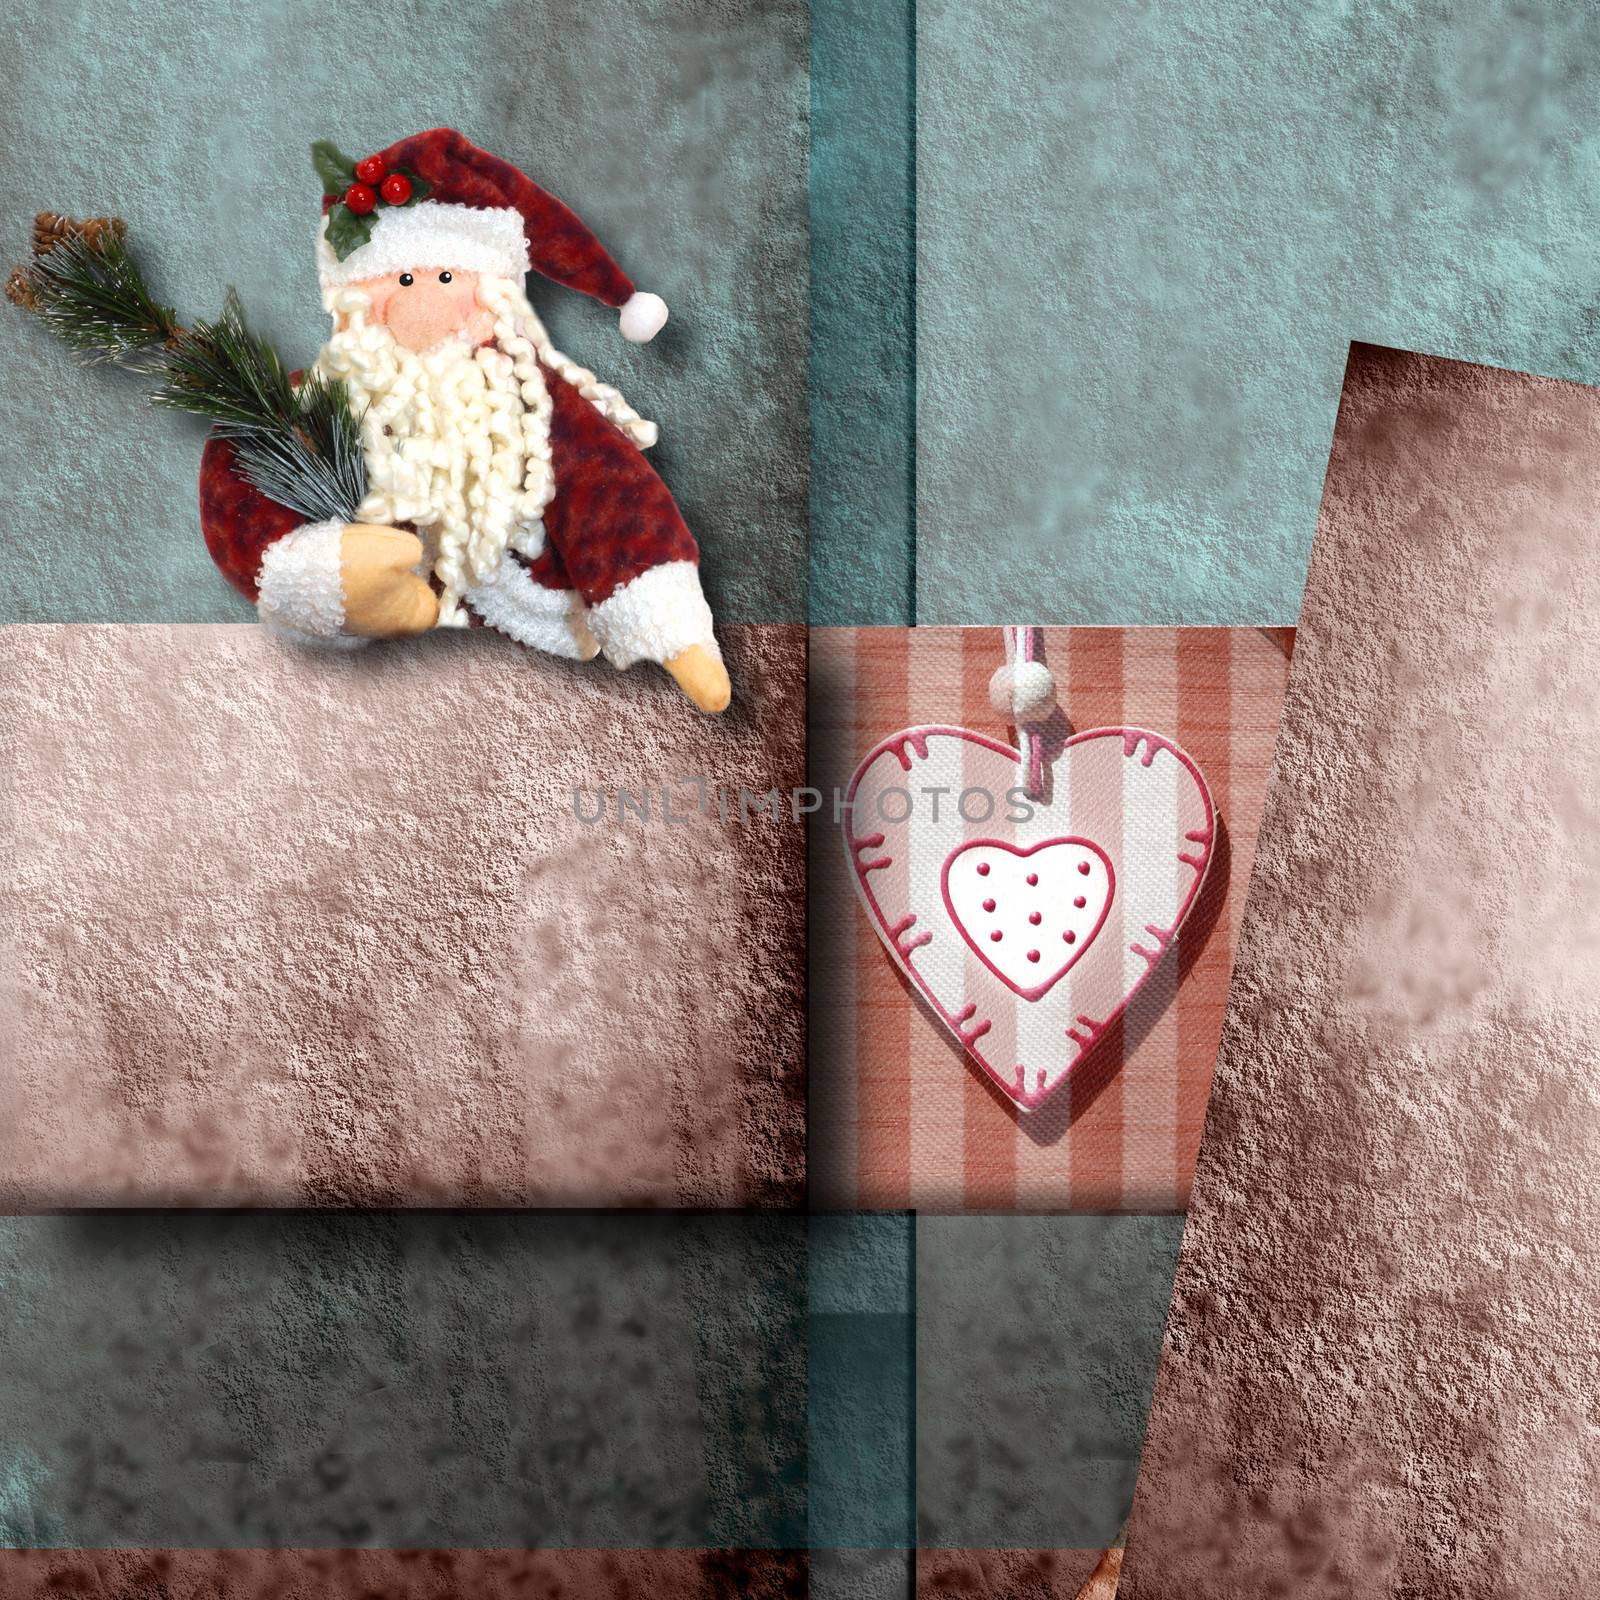 Santa Claus greeting Christmas card by Carche